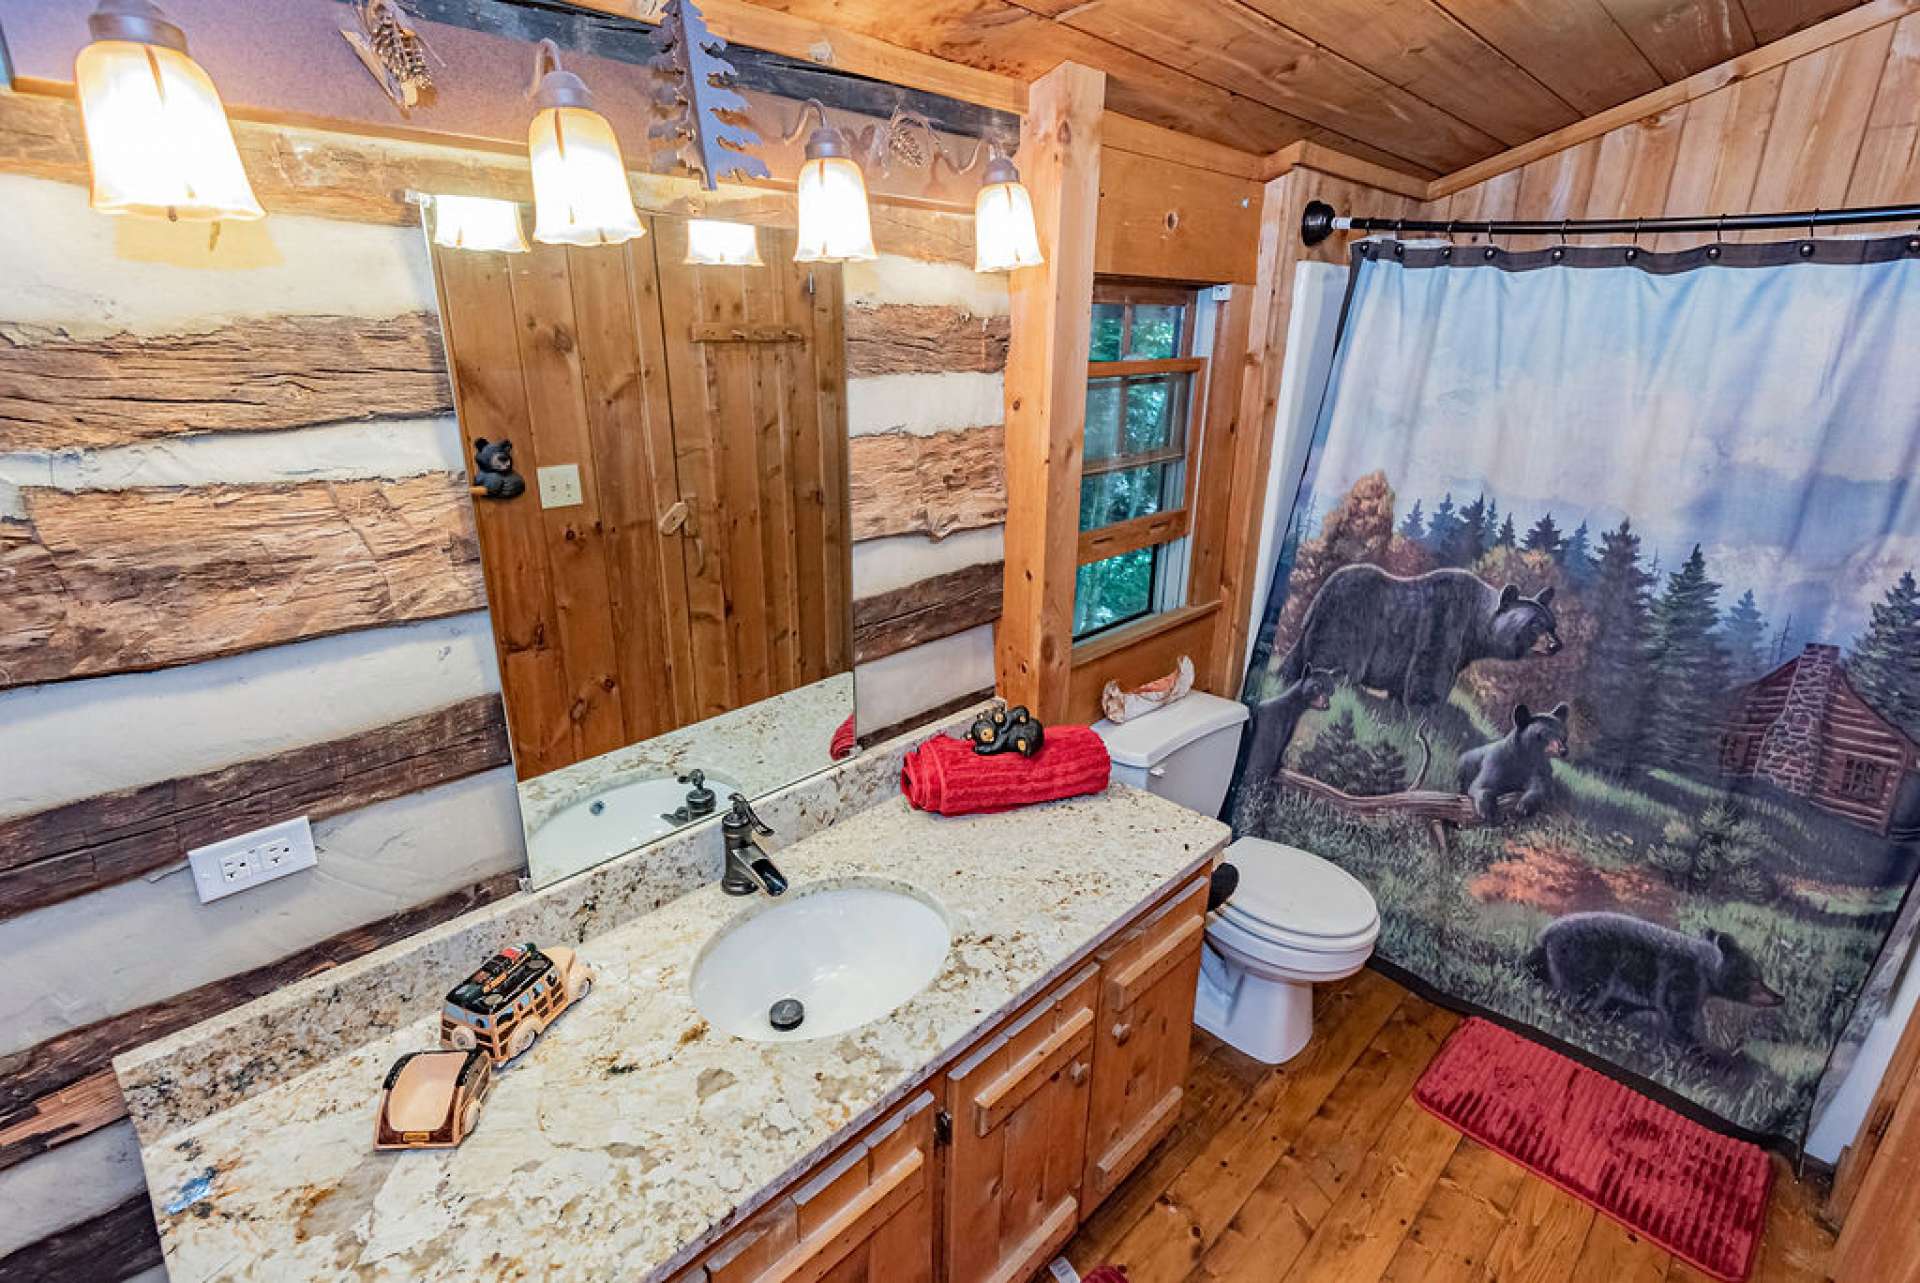 The two upper level guest bedrooms share a full bath.  You know you are in the mountains when you can hear the creek from the bathroom.